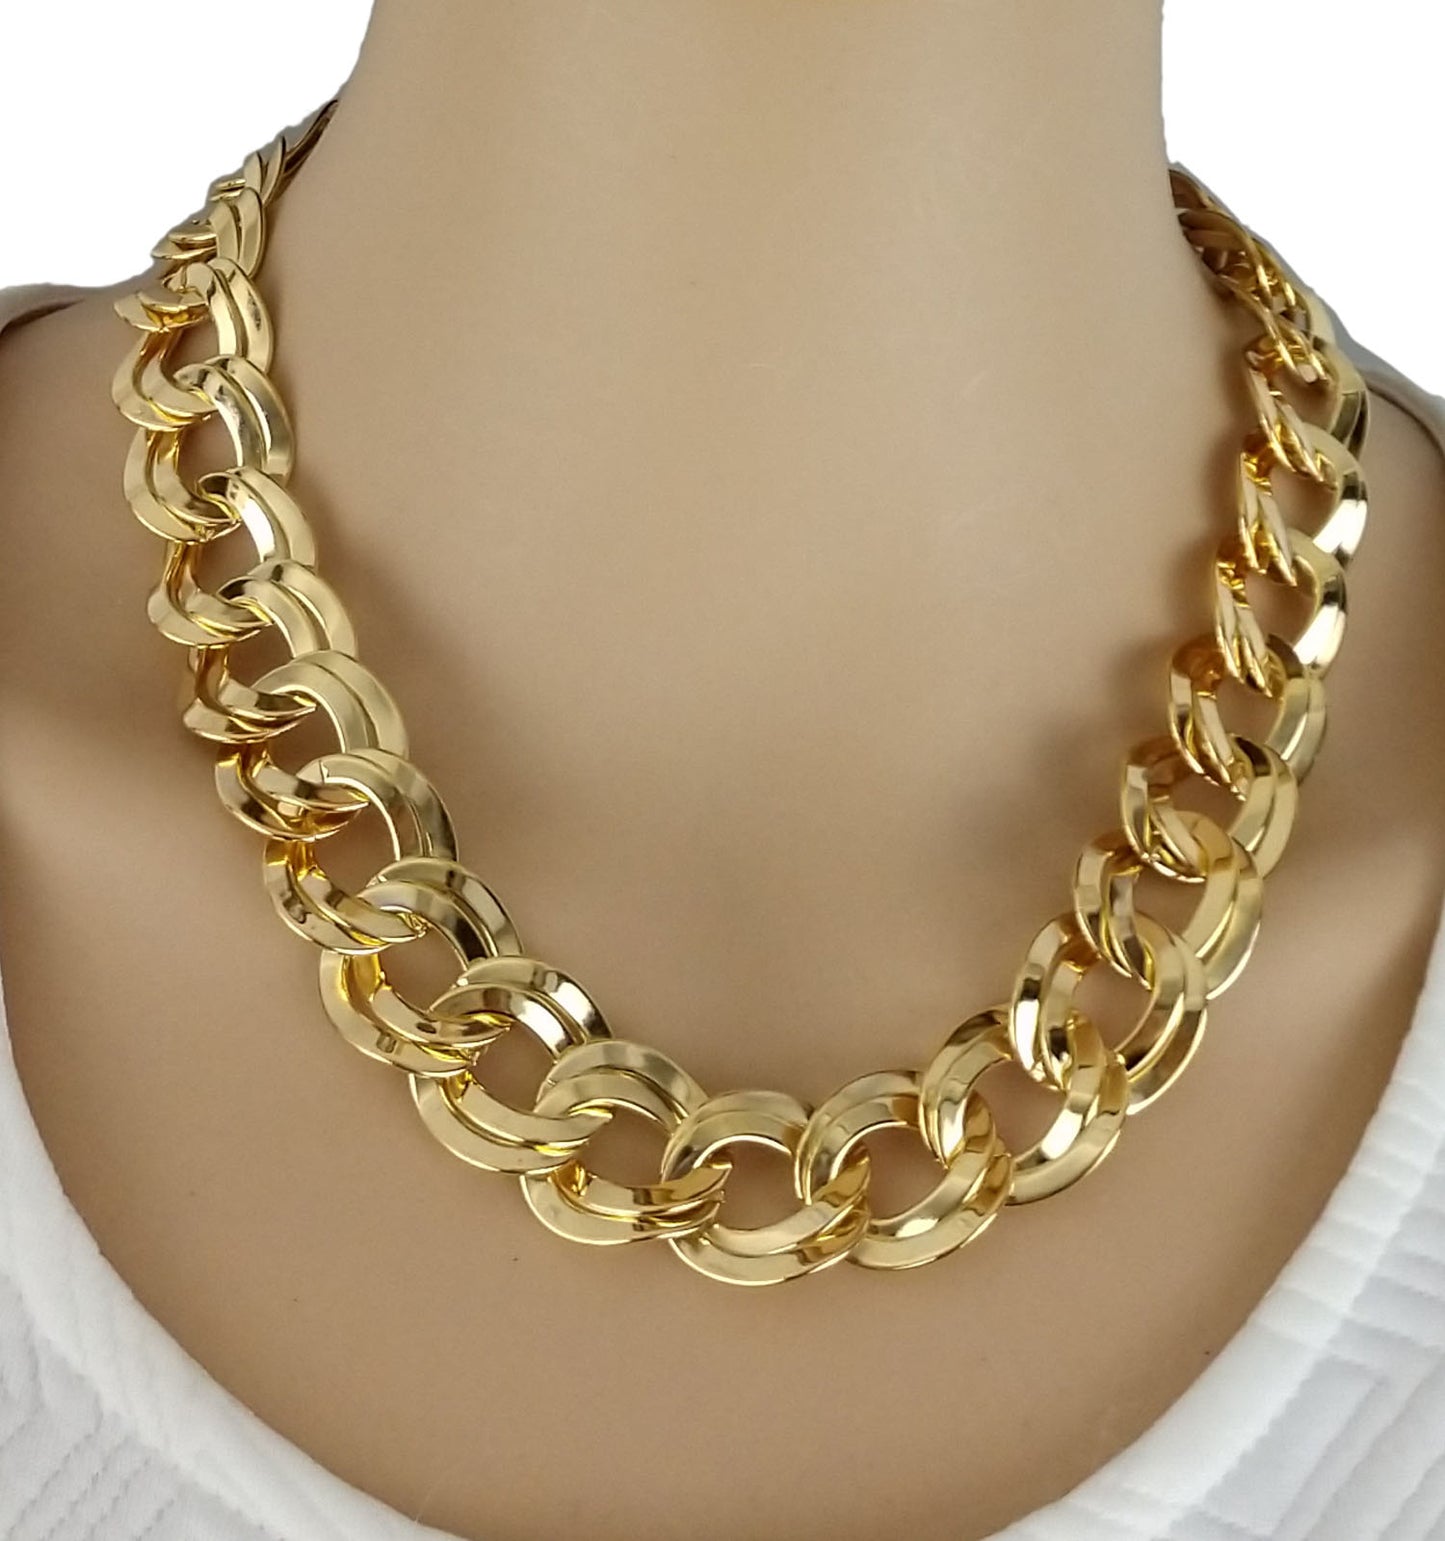 Ky & Co Double Link Thick Chain Necklace Gold Tone Chunky 18" Made in USA